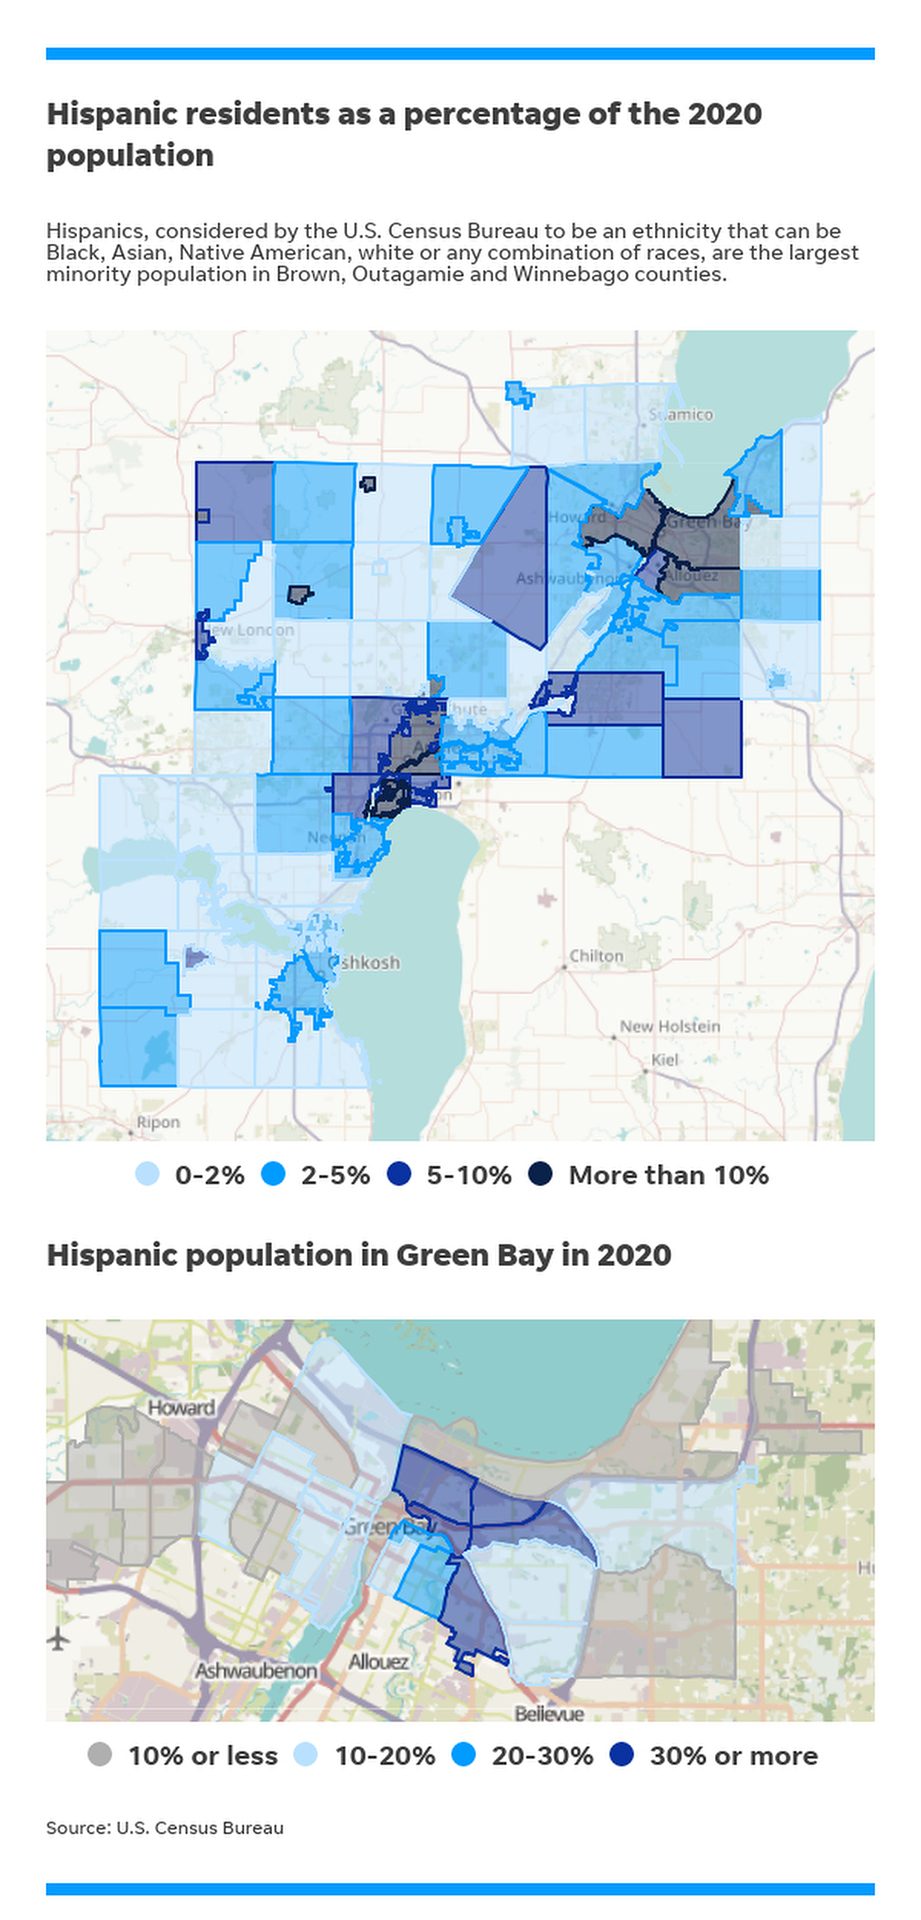 One map of northeast Wisconsin features the title "Hispanic residents as a percentage of the 2020 population" and the subtitle "Hispanics, considered by the U.S. Census Bureau to be an ethnicity that can be Black, Asian, Native American, white or any combination of races, are the largest minority population in Brown, Outagamie and Winnebago counties." Another map beneath it features the title "Hispanic population in Green Bay in 2020."